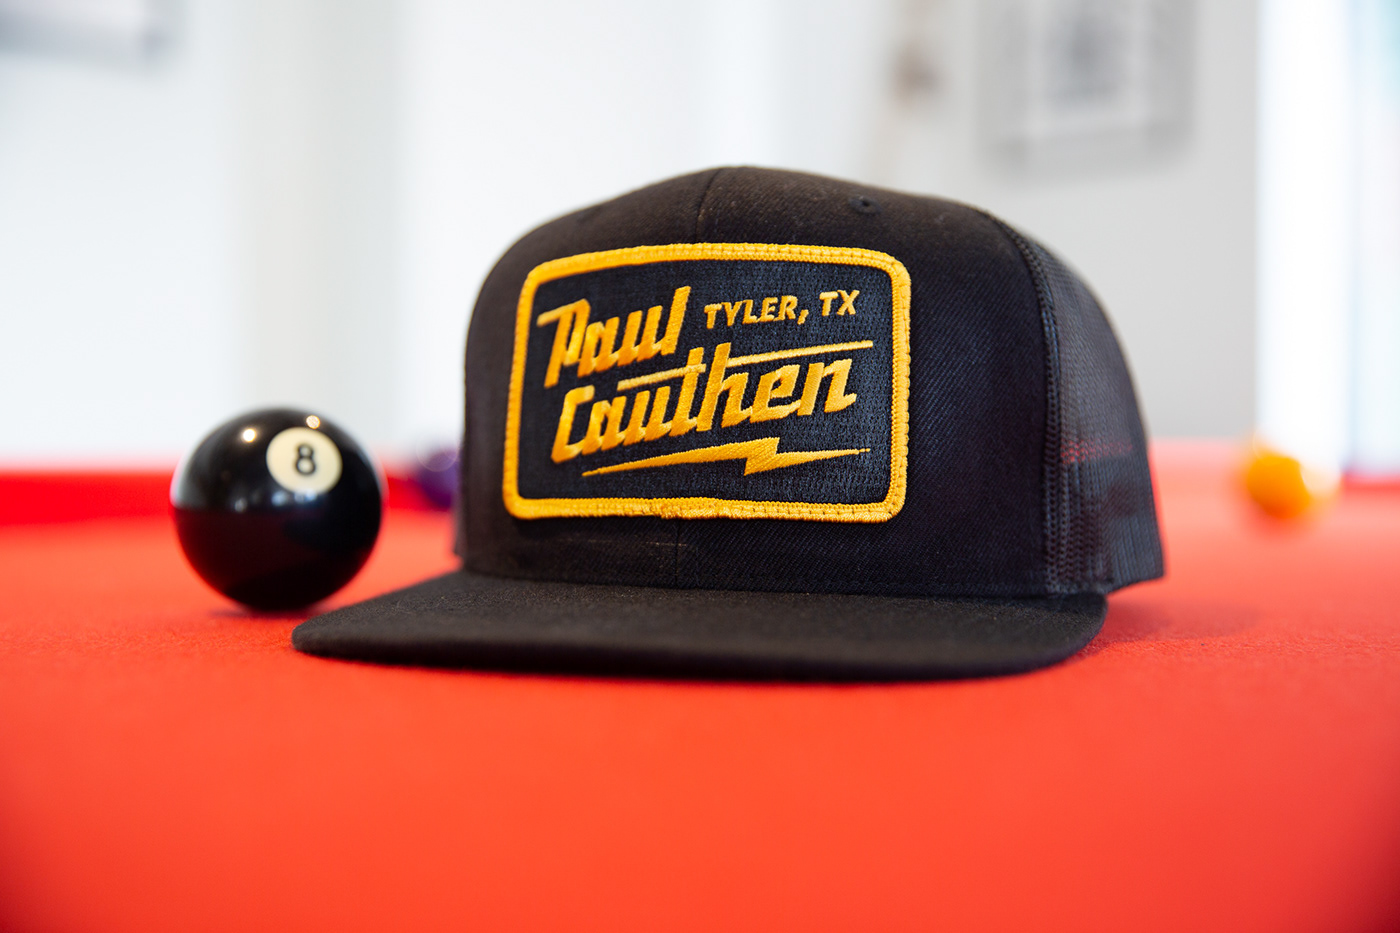 Black trucker hat with an embroidered patch on a red pool table.